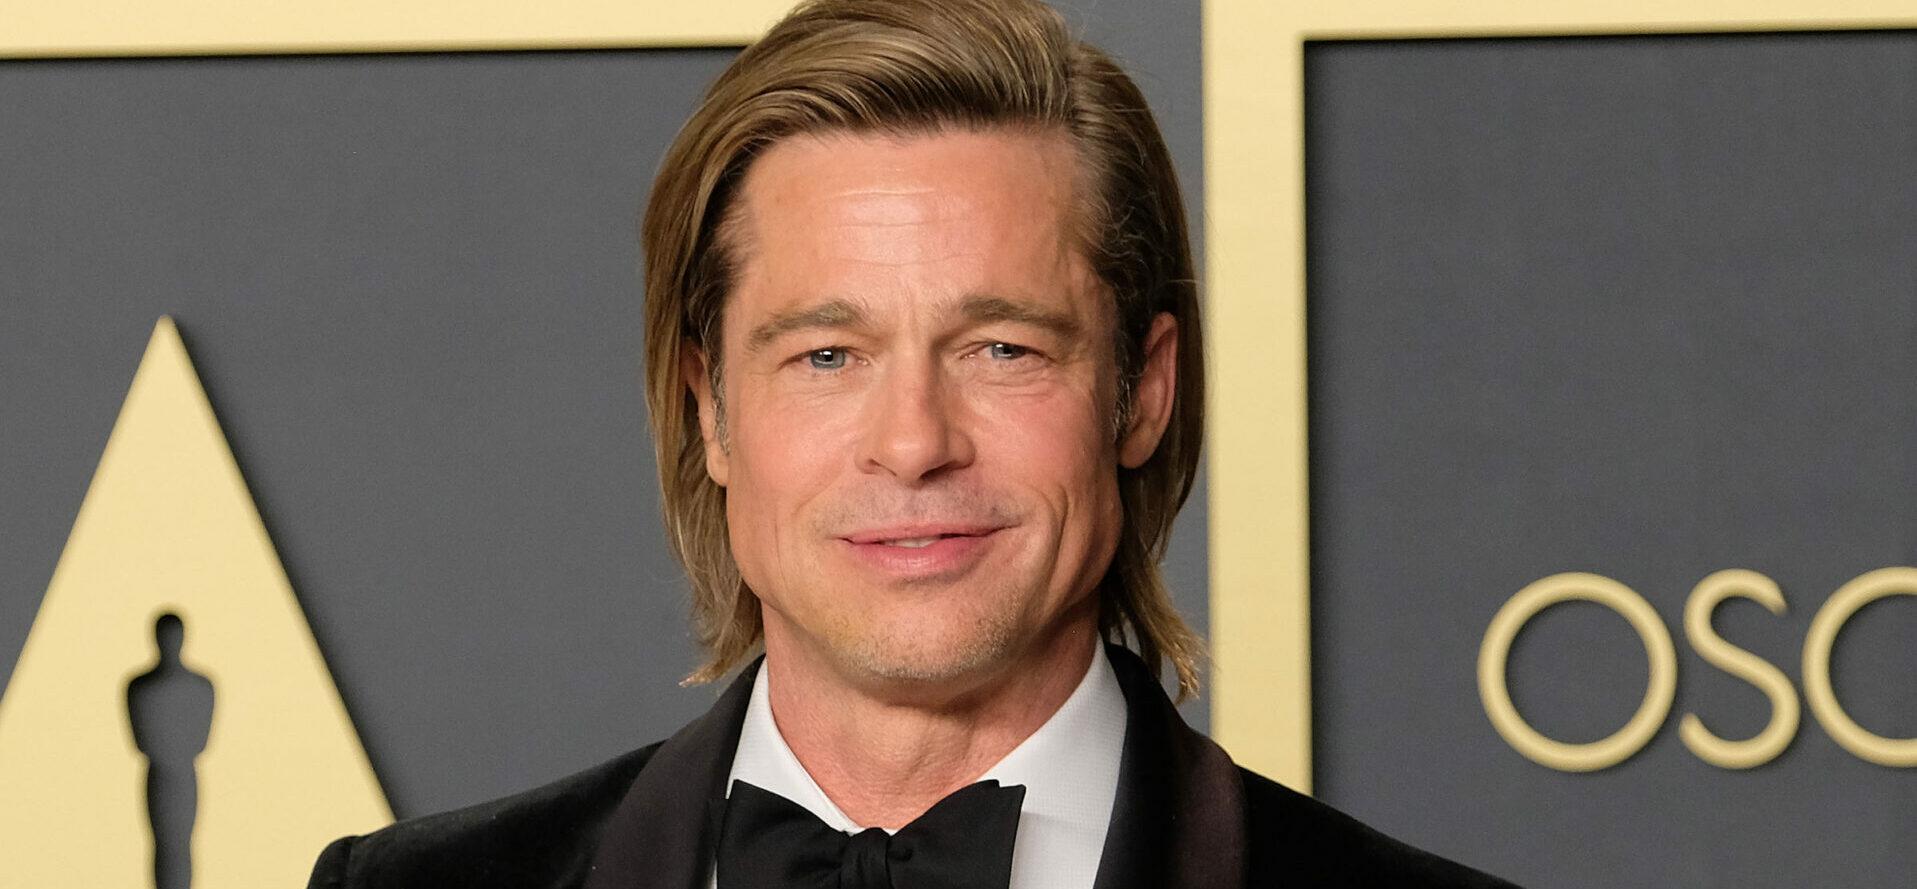 Brad Pitt Dealing With ‘Difficult’ Custody Situation On His 58th Birthday